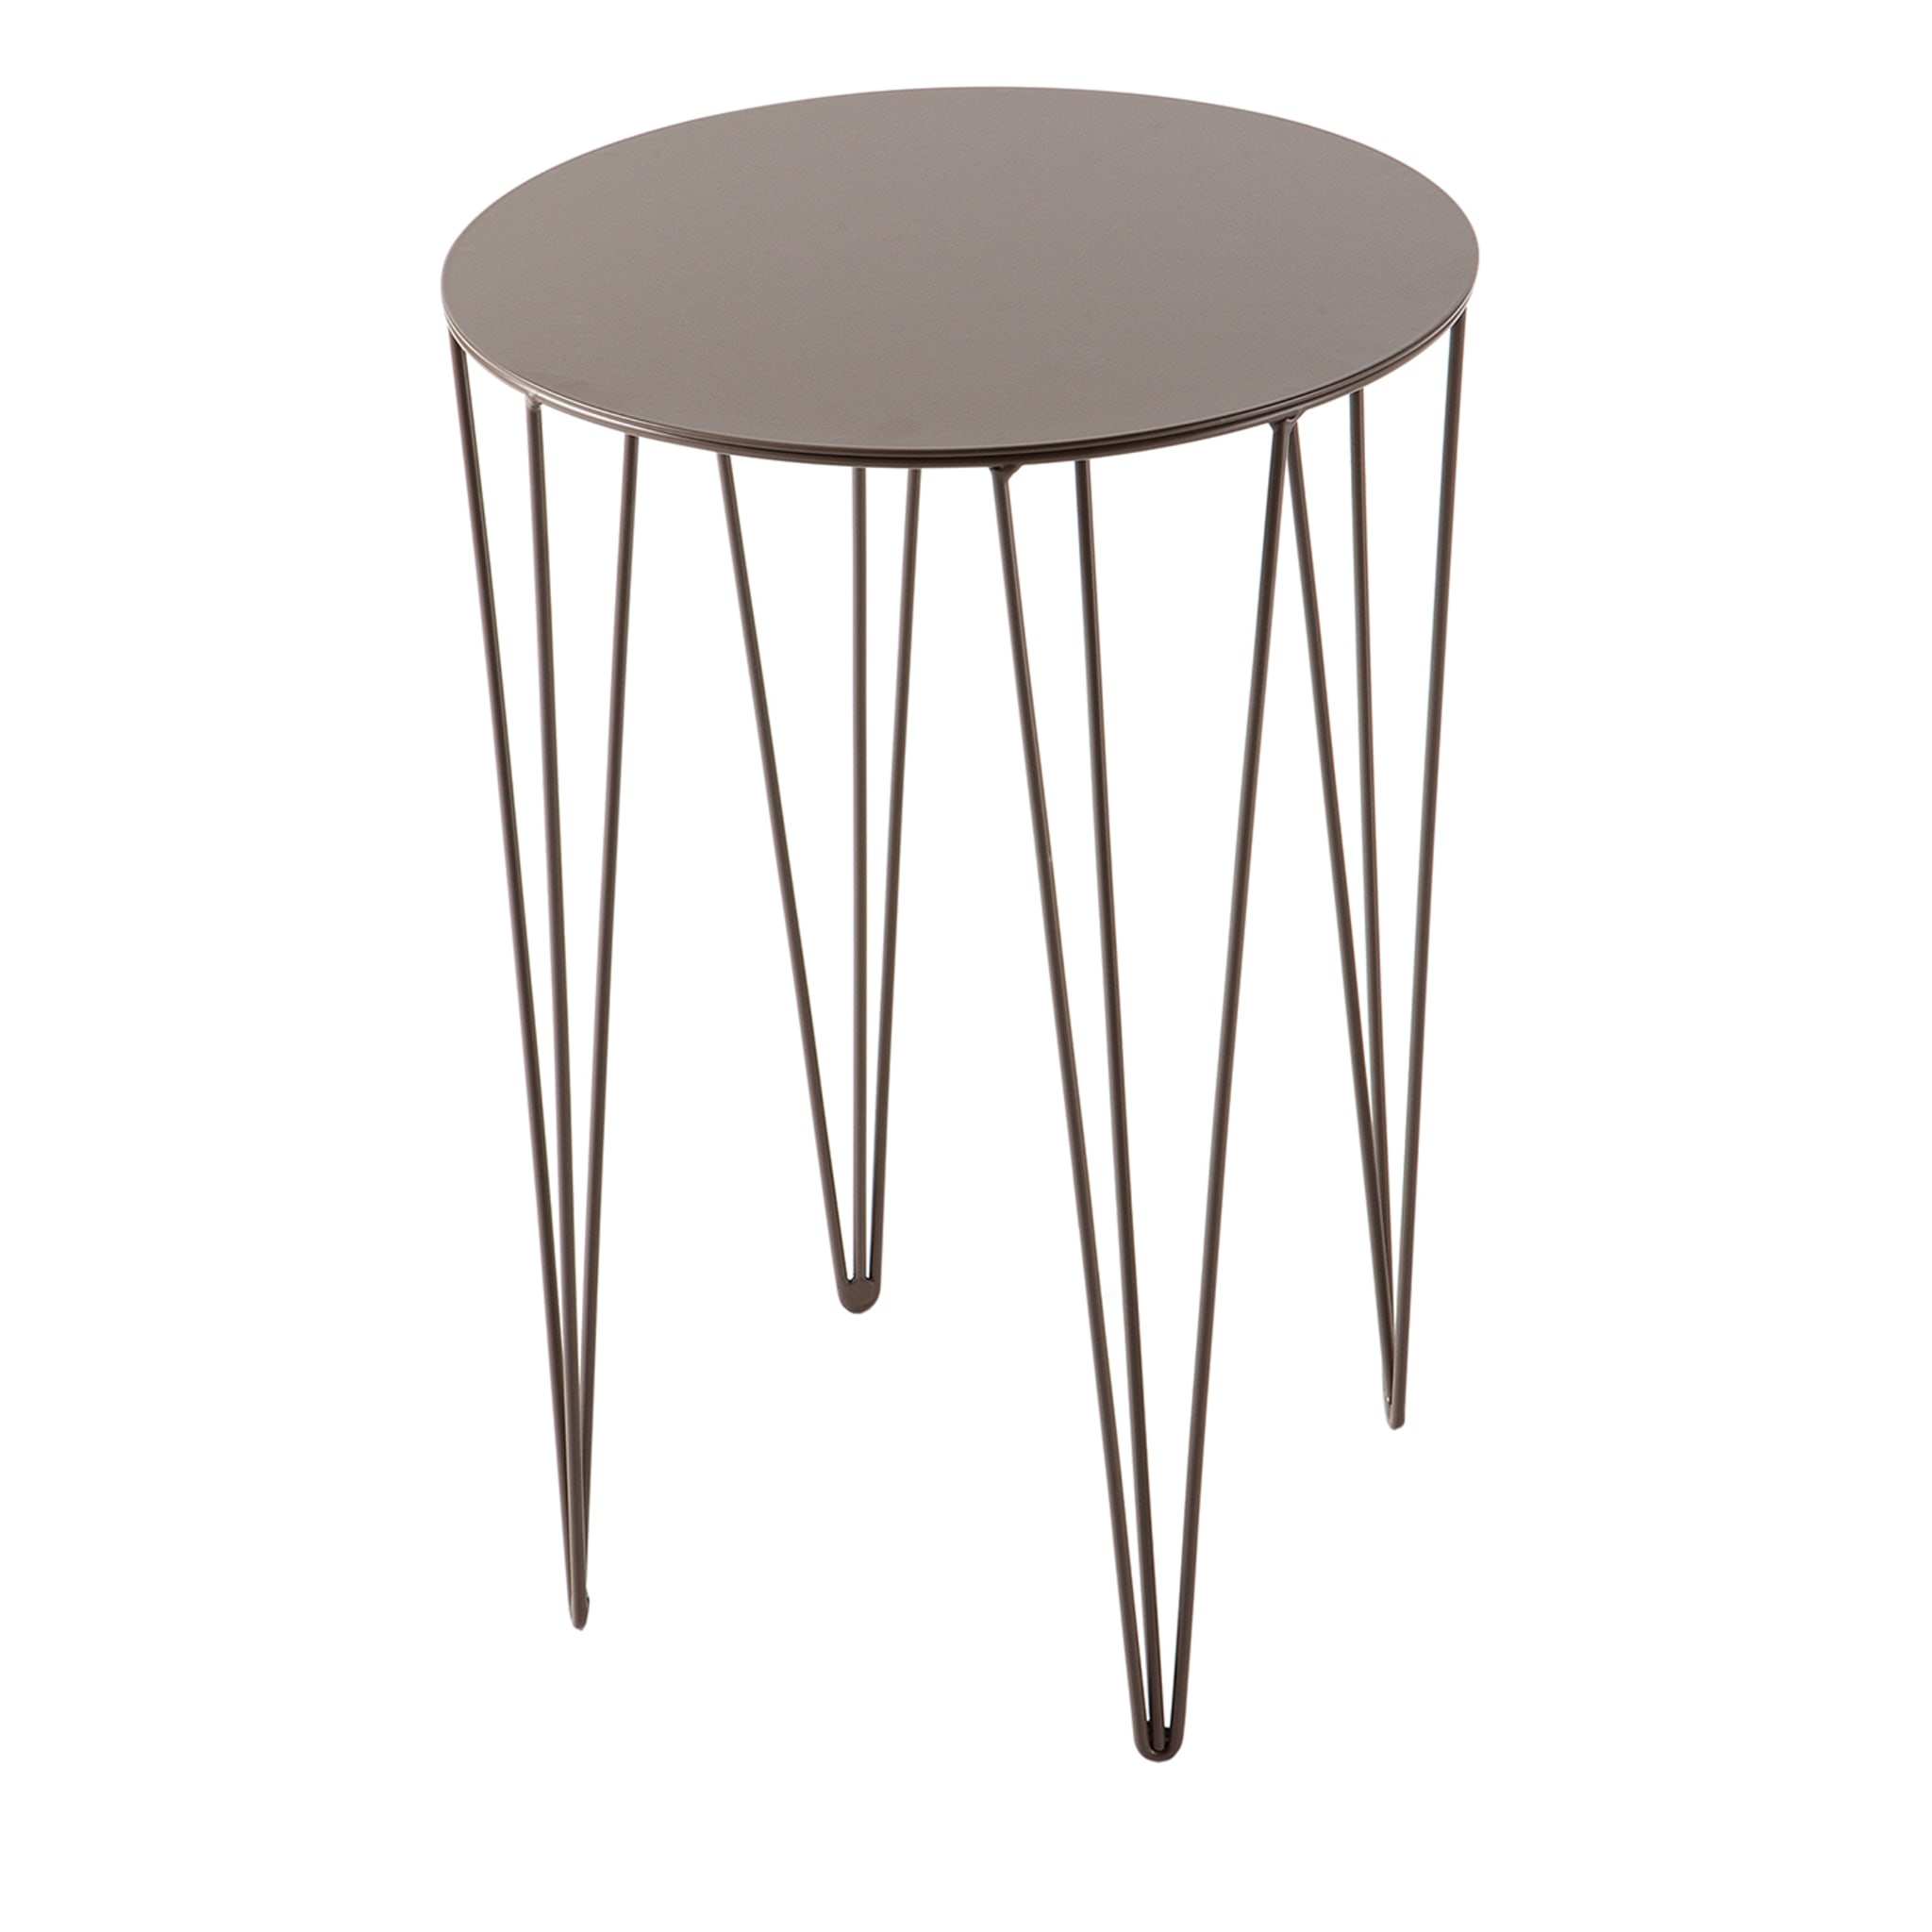 Chele Taupe Round Coffee Table #1 - Main view